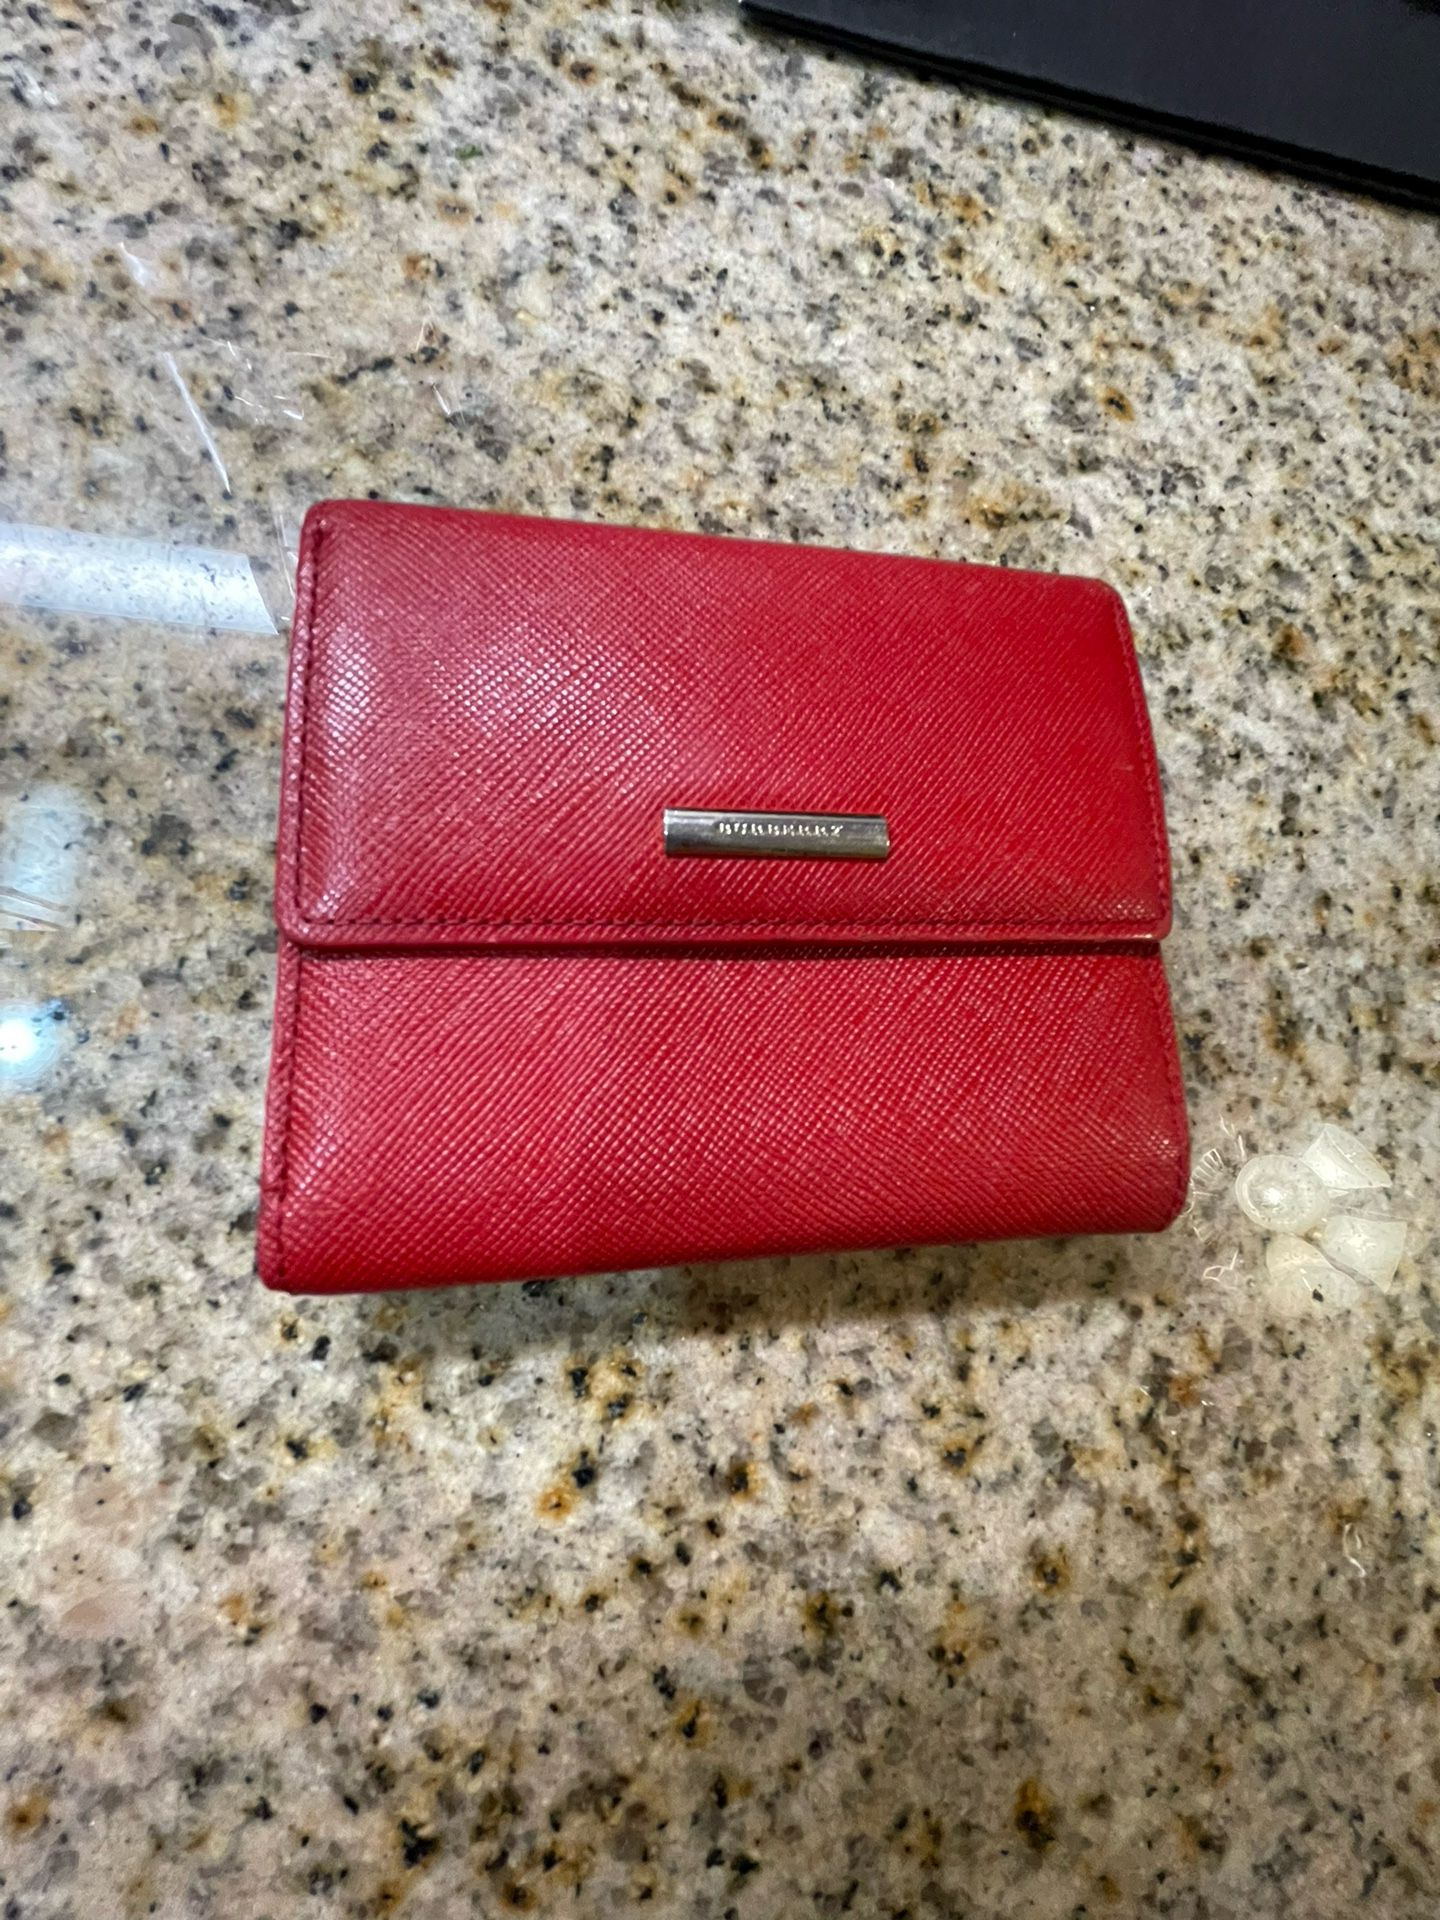 Burberry Red Leather Wallet